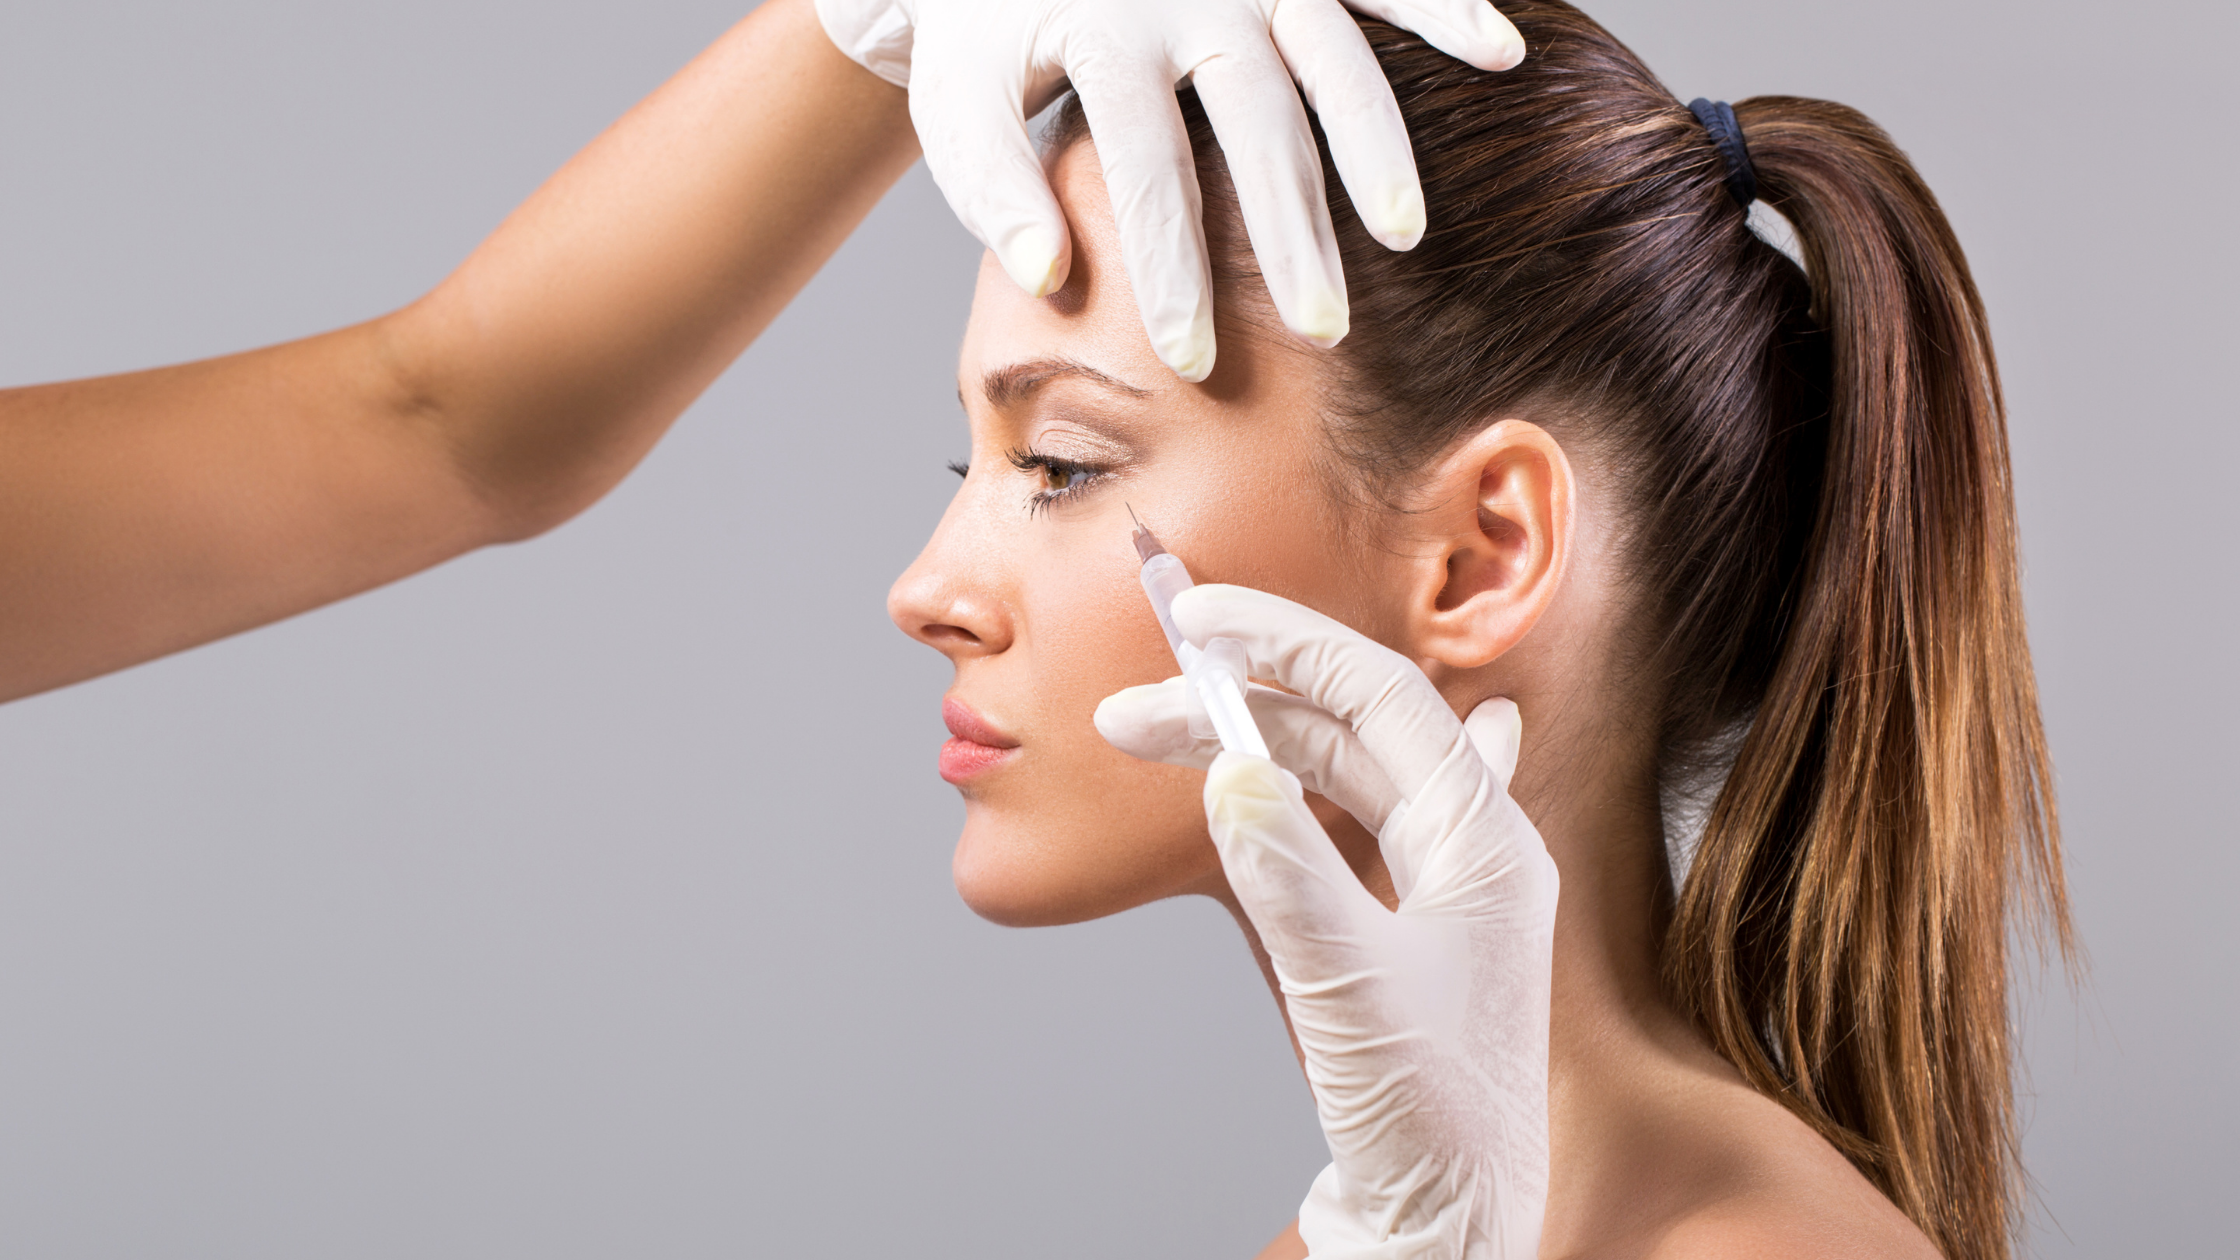 Botox Treatment for Face & Skin: What you should know before getting one?